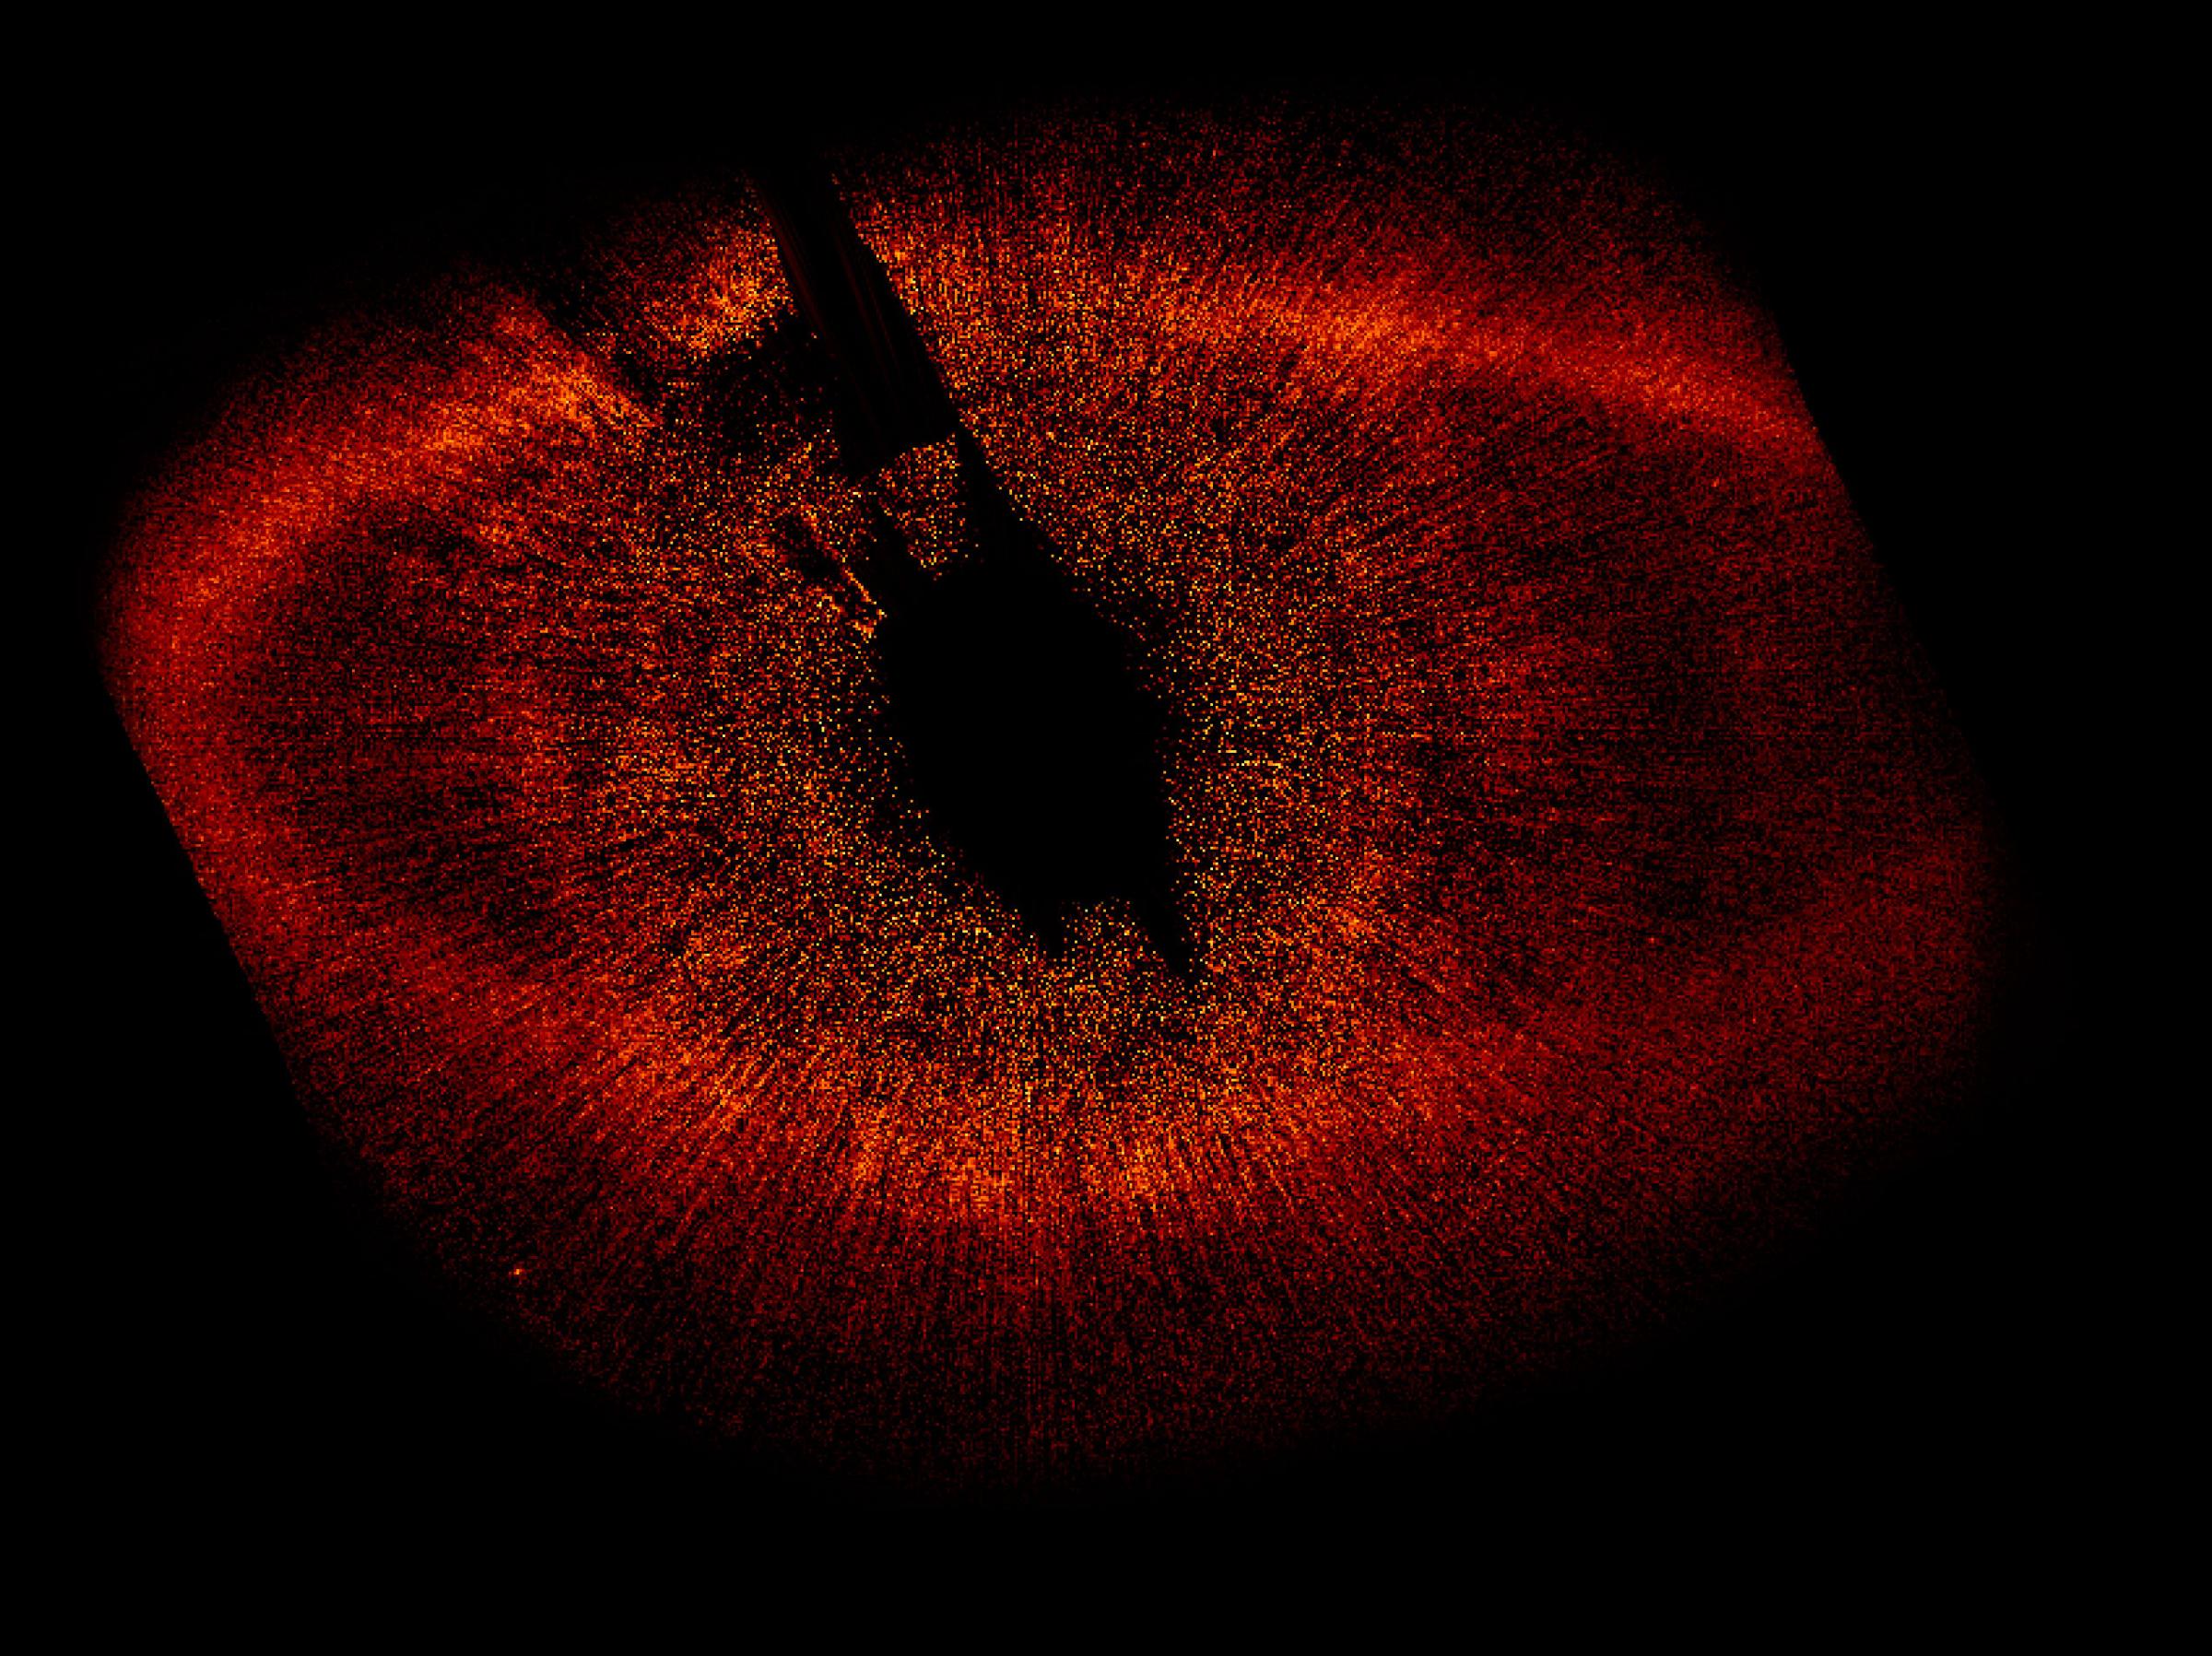 English: The large disk of gas surrounding Fomalhaut is clearly visible in this image. It is not centred on Fomalhaut quite as predicted, hinting that the gravity of another body – perhaps a planet – is pulling it out of shape.Date 13 November 2008Source http://www.spacetelescope.org/images/html/heic0821c.html (direct link)http://hubblesite.org/newscenter/archive/releases/2008/39/image/b/Author NASA, ESA and P. Kalas (University of California, Berkeley, USA)